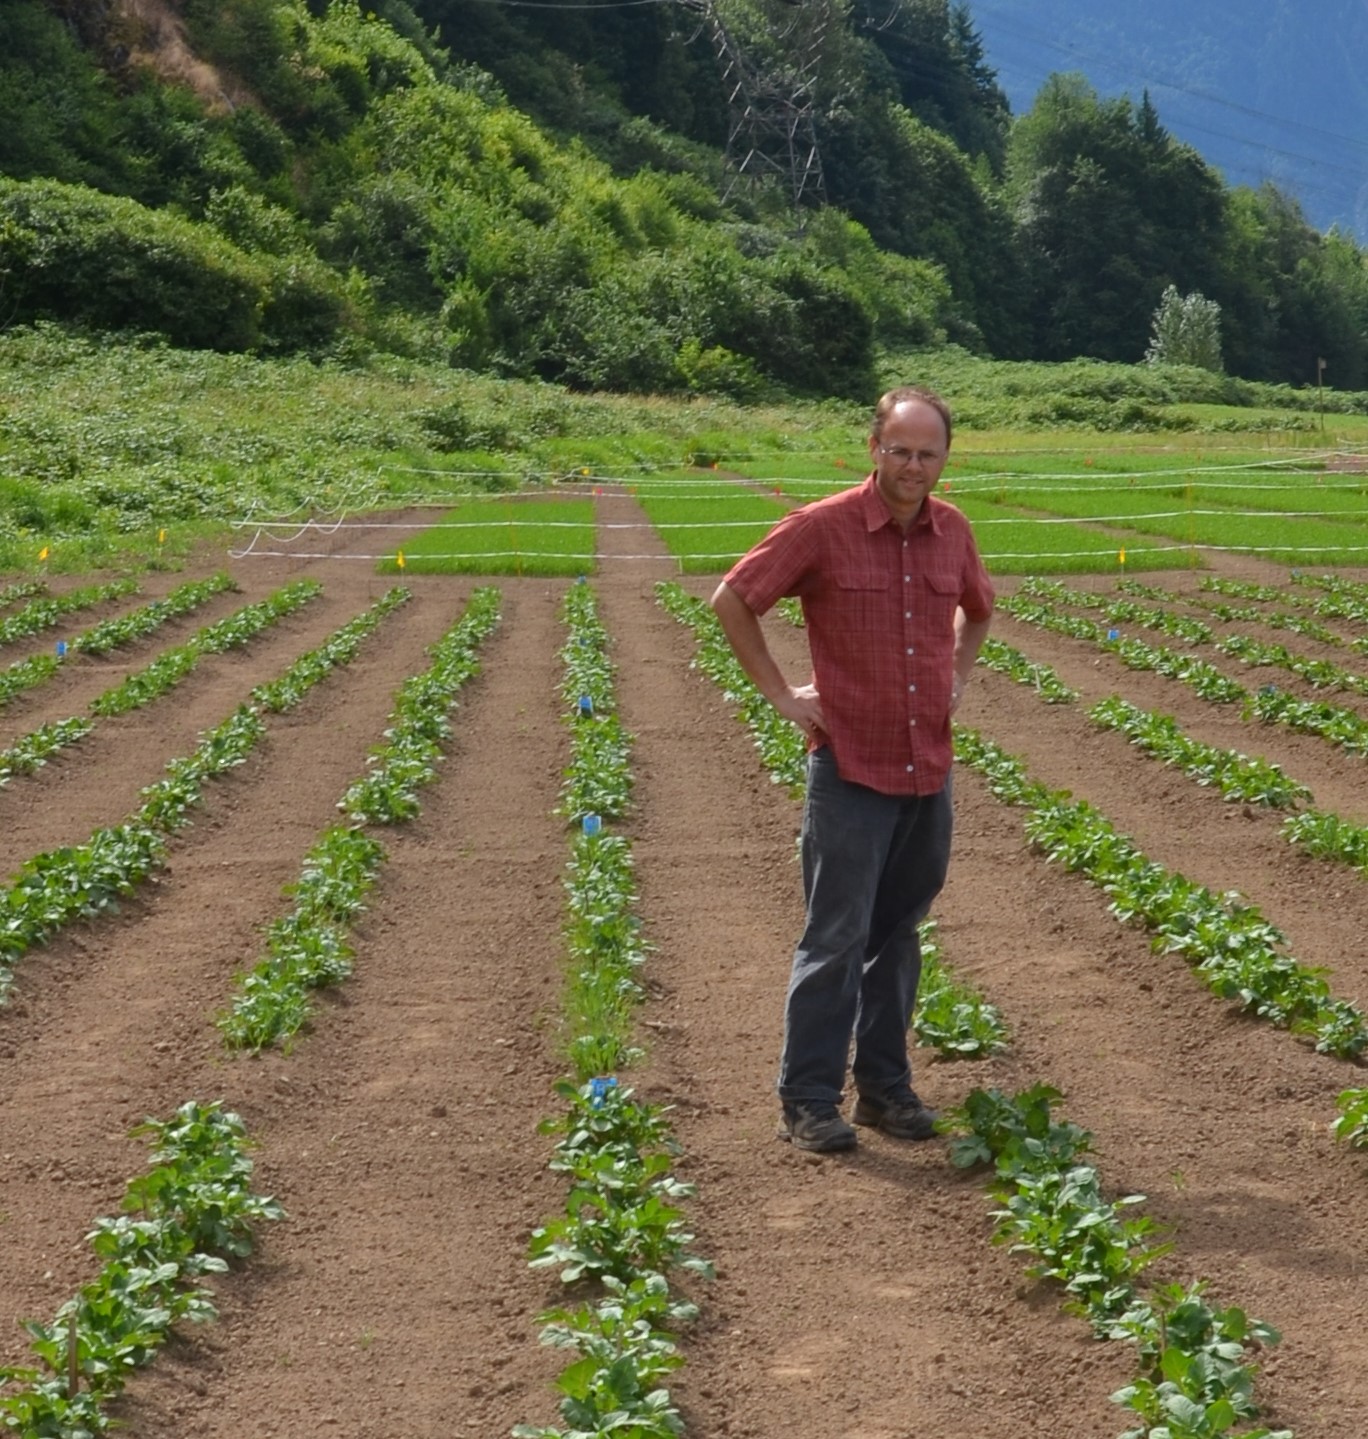 A scientist stands in a field of crops with mountains behind them